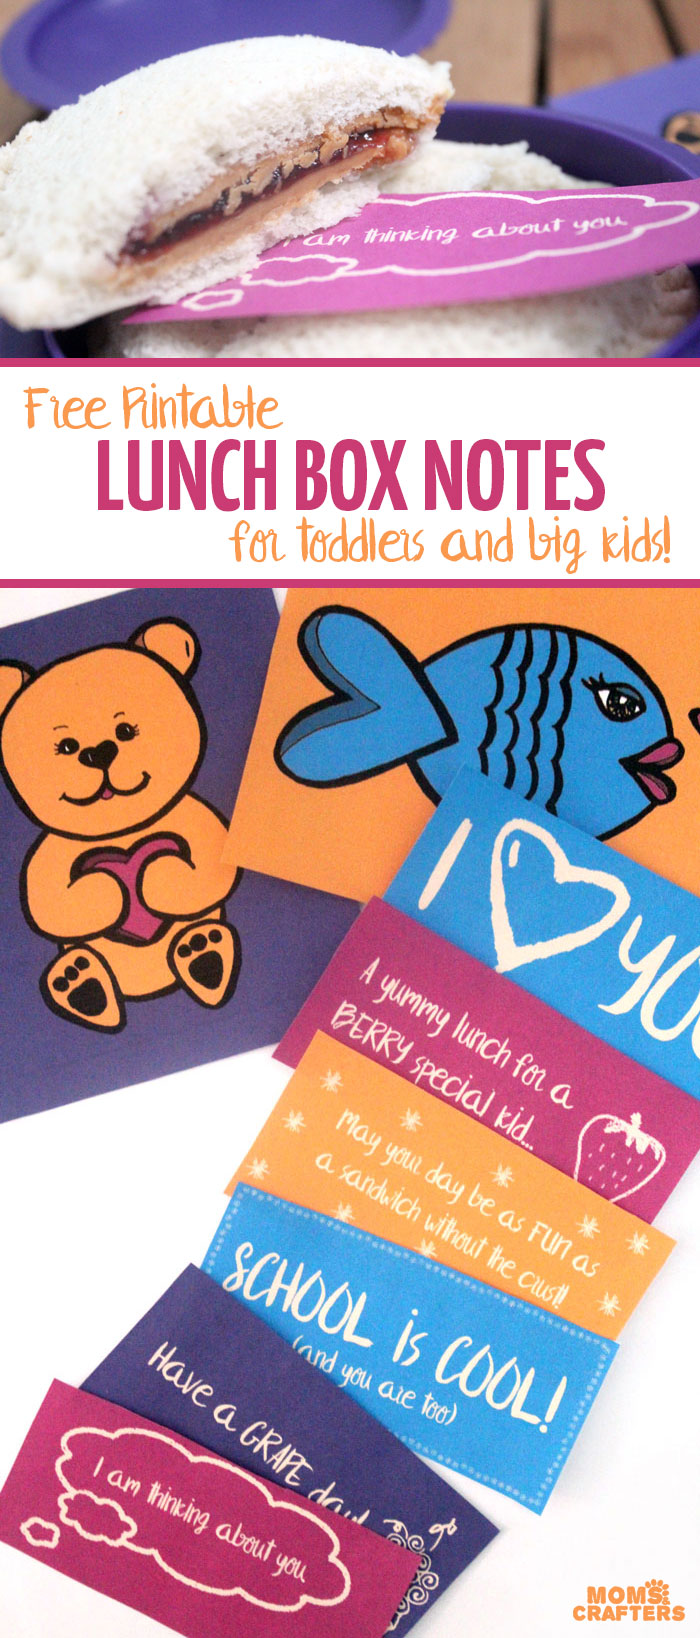 Grab these free printable lunch box notes to add that personal touch to your child's lunch! They include fun, positive messages, plus two picture cards for toddlers and non-readers!